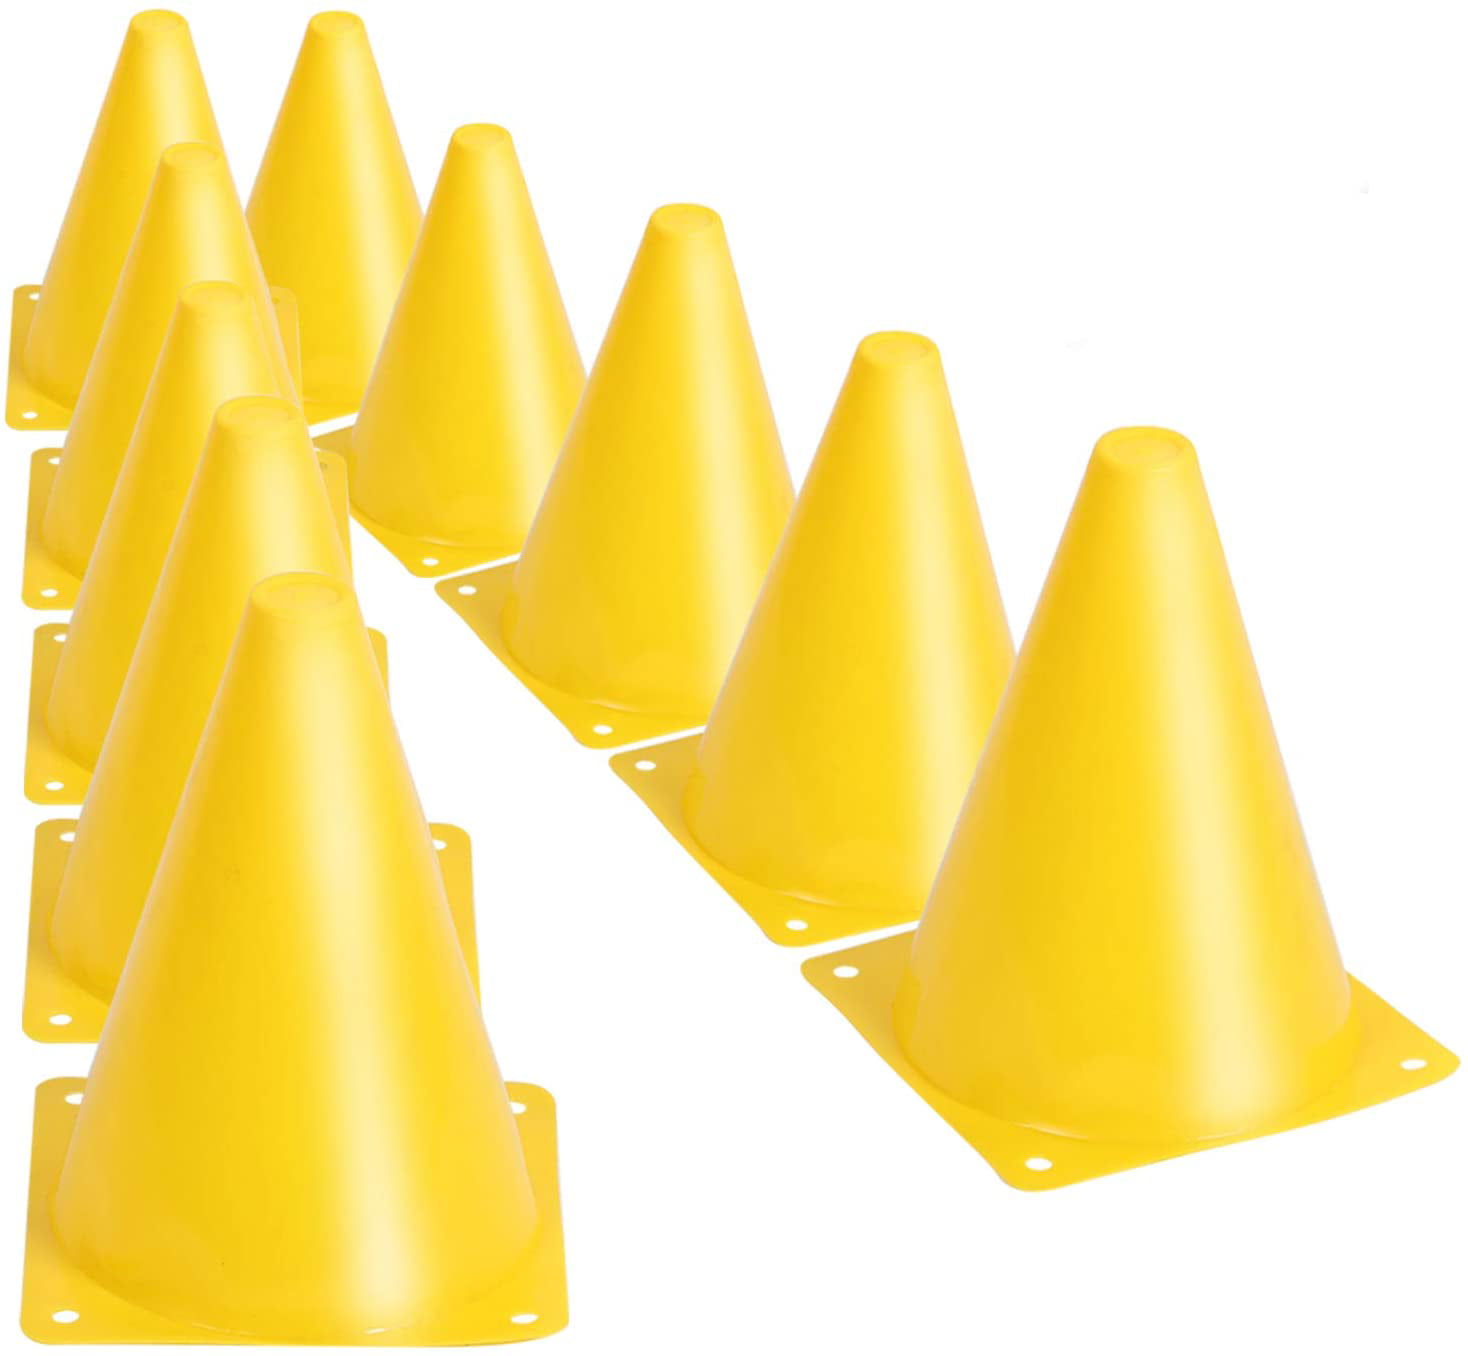 New Precision Training Traffic Cones Football Marker Drill Safety Cone Set Of 4 